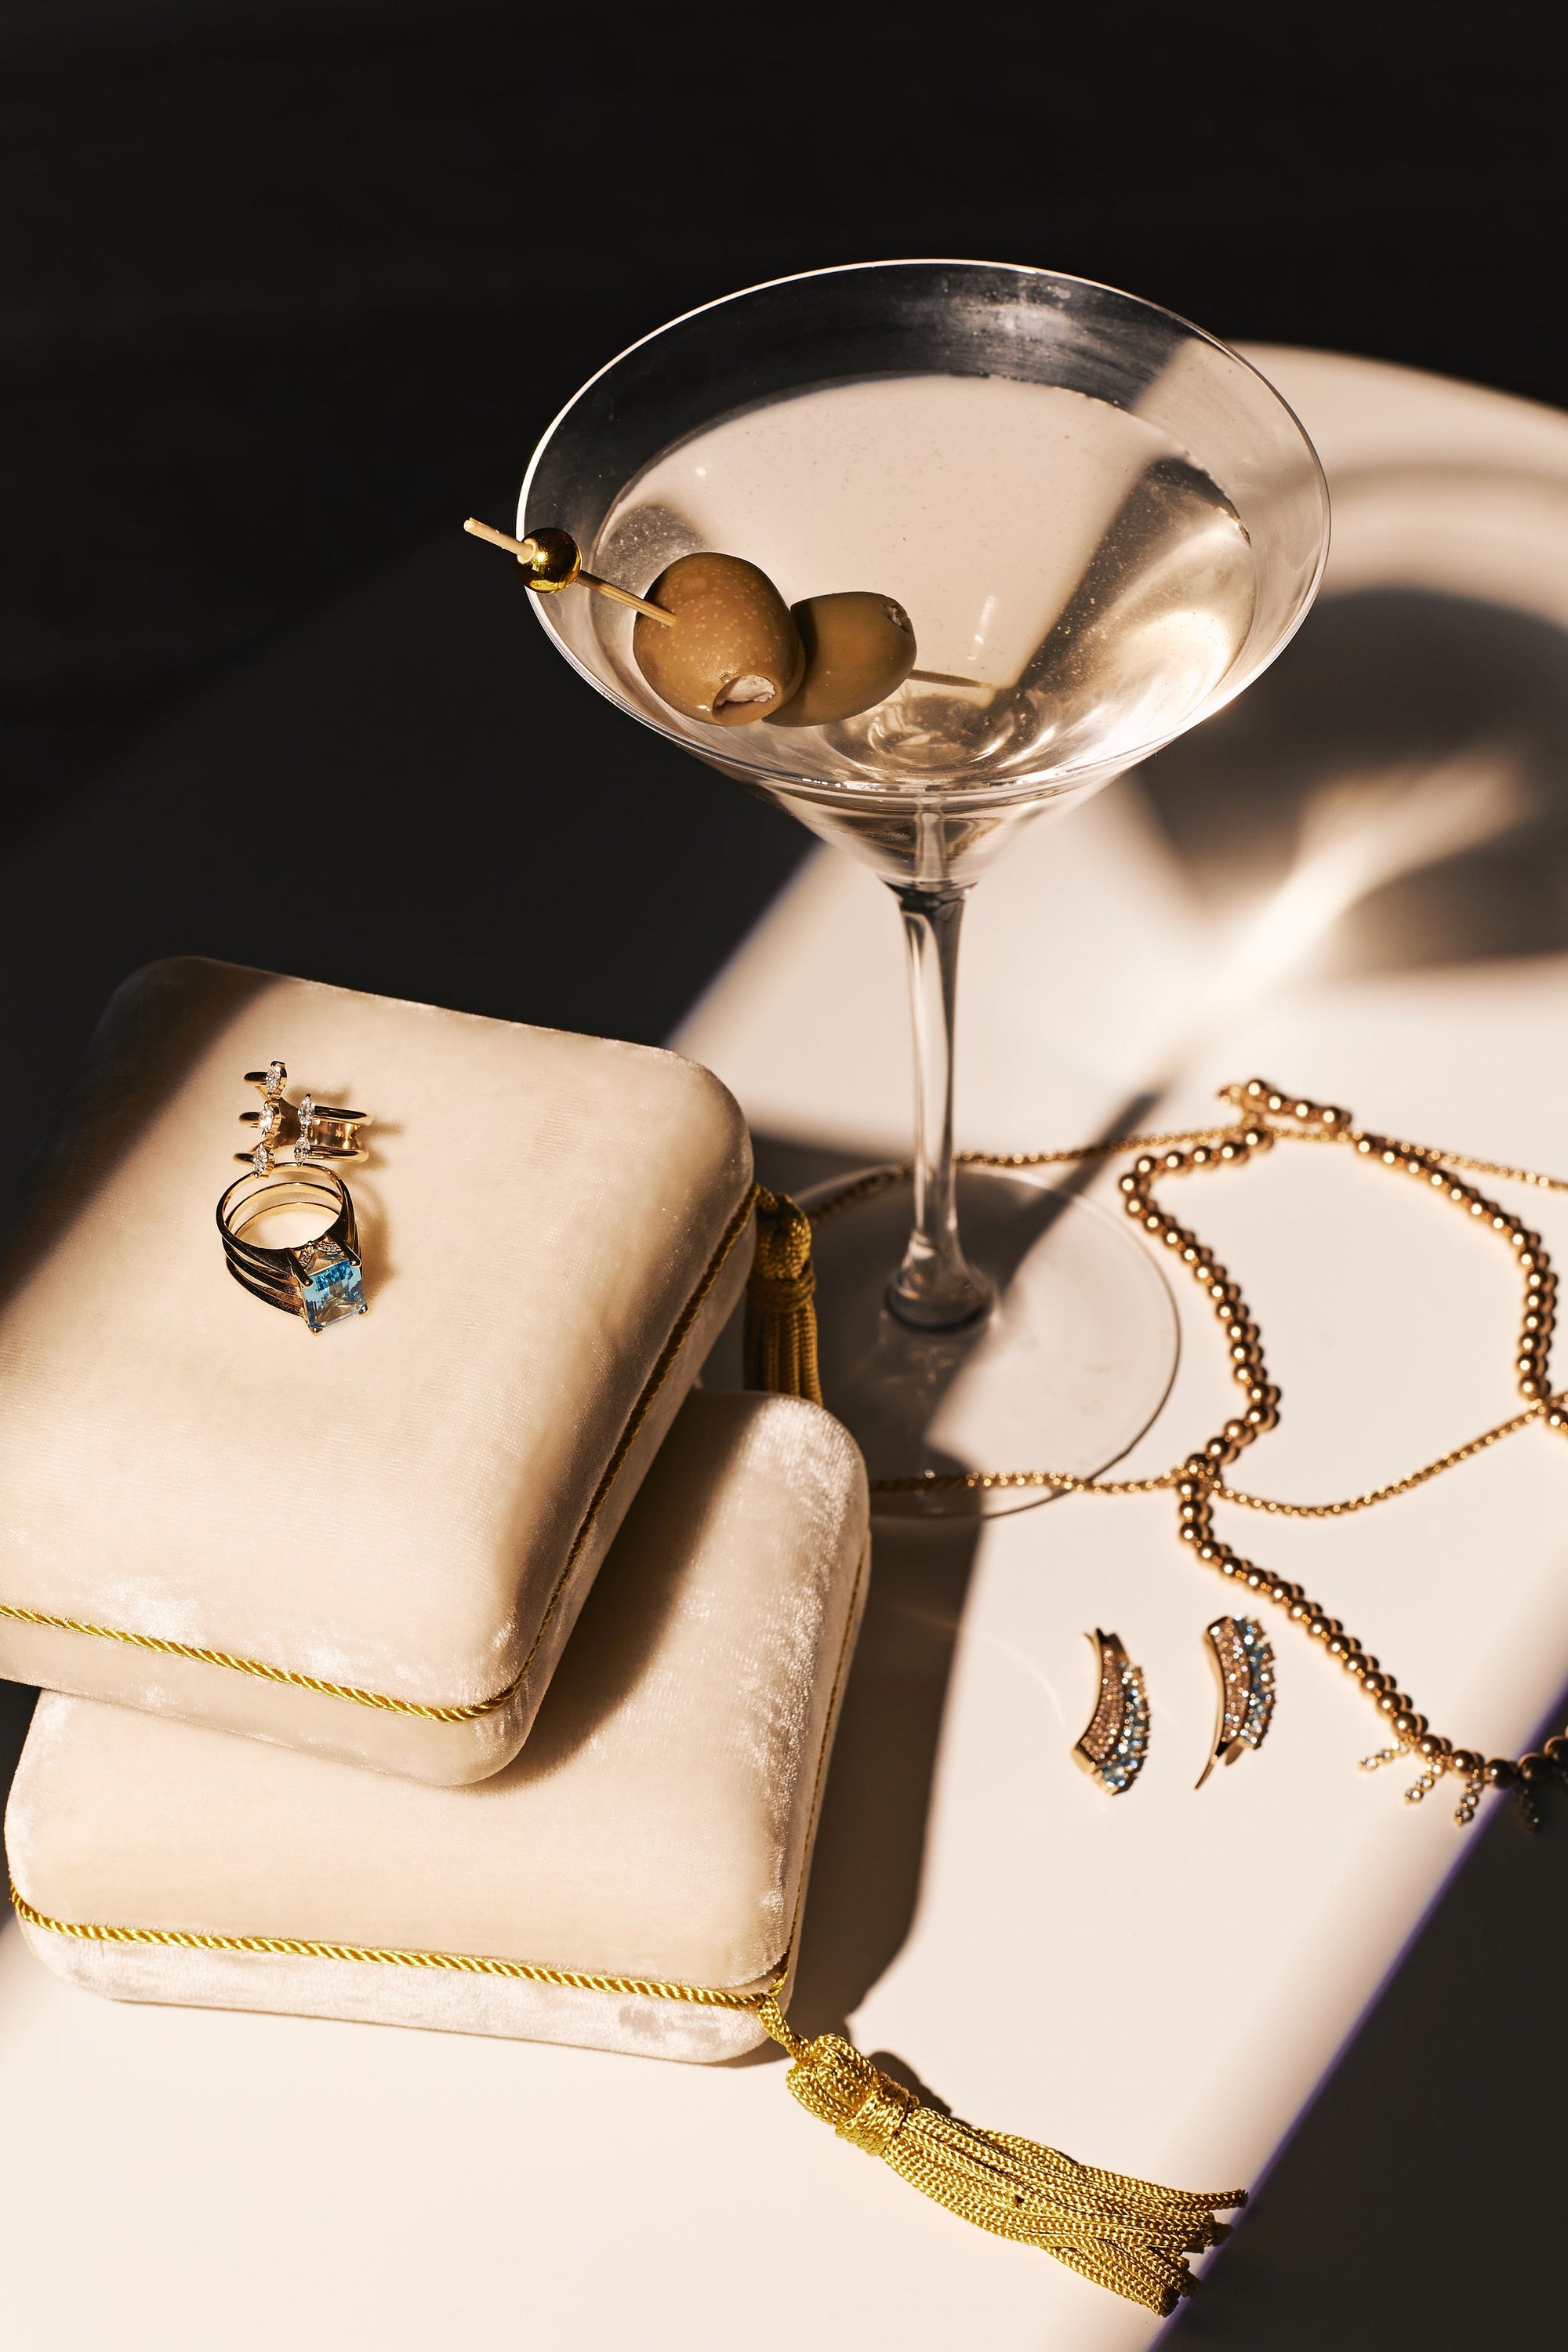 A martini glass with olives sits on a surface next to the Jewelry Pochette Case by Nijma M Fine Jewelry. The case, topped with rings and featuring gold tassel detailing, is surrounded by gold necklaces and earrings adorned with diamonds. Sunlight casts delicate shadows, enhancing the luxurious ambiance.